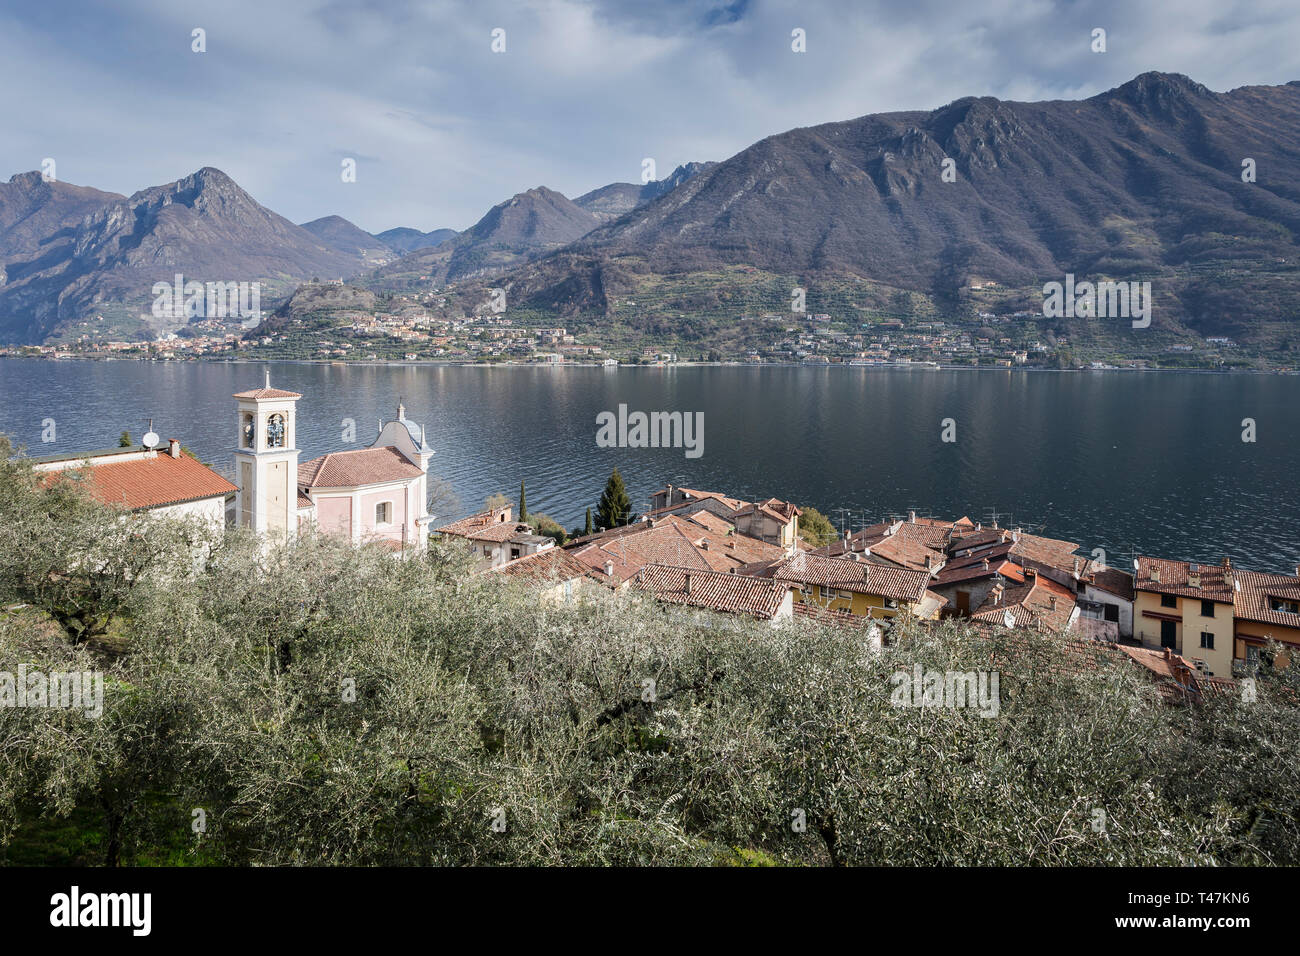 Olive grove and Carzano village of Monte Isola, Lake Iseo, Lombardy, Italy Stock Photo